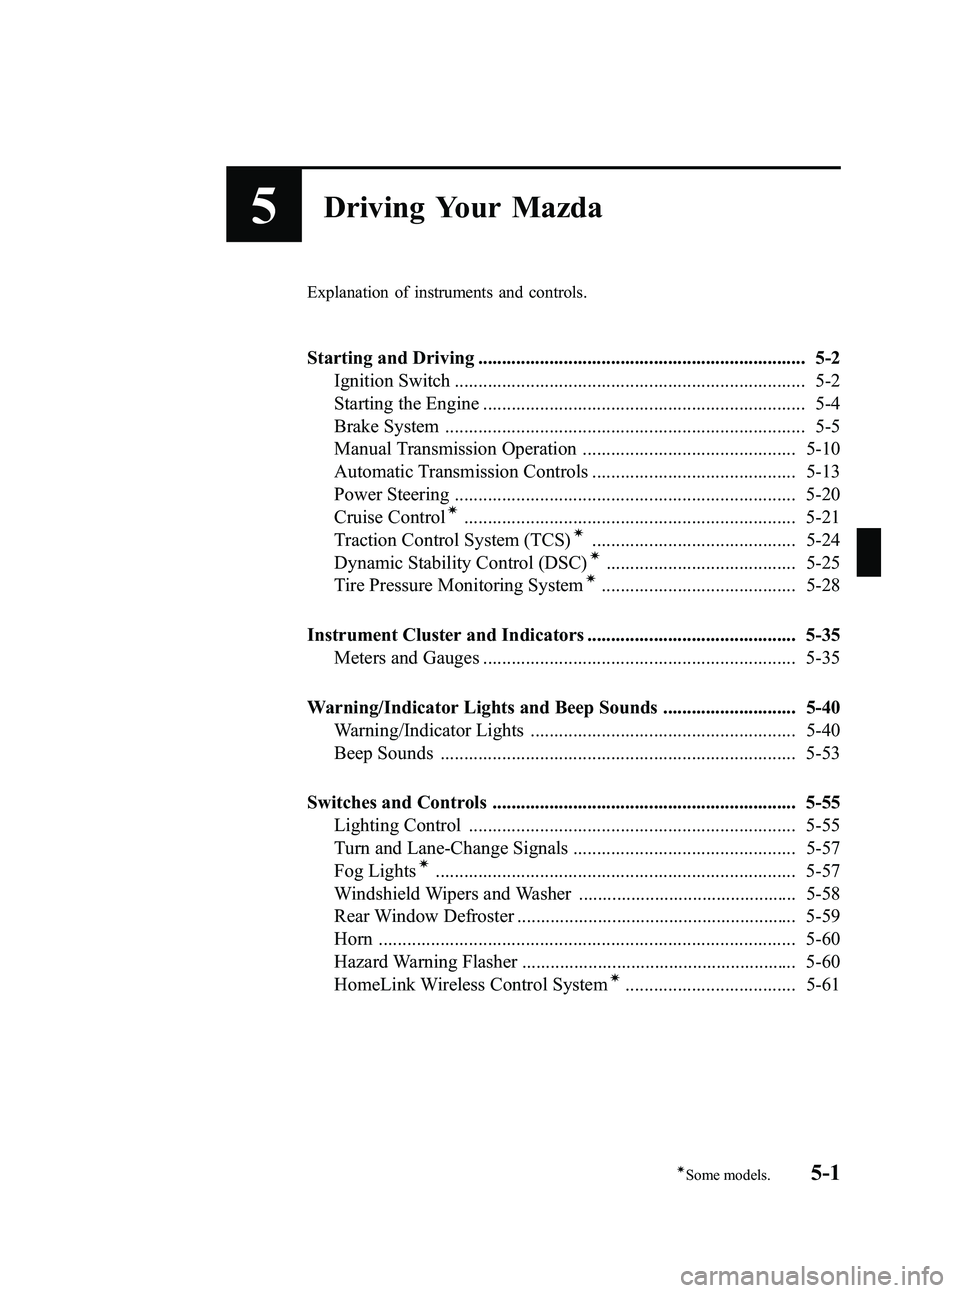 MAZDA MODEL MX-5 MIATA 2009  Owners Manual Black plate (153,1)
5Driving Your Mazda
Explanation of instruments and controls.
Starting and Driving ..................................................................... 5-2Ignition Switch .........